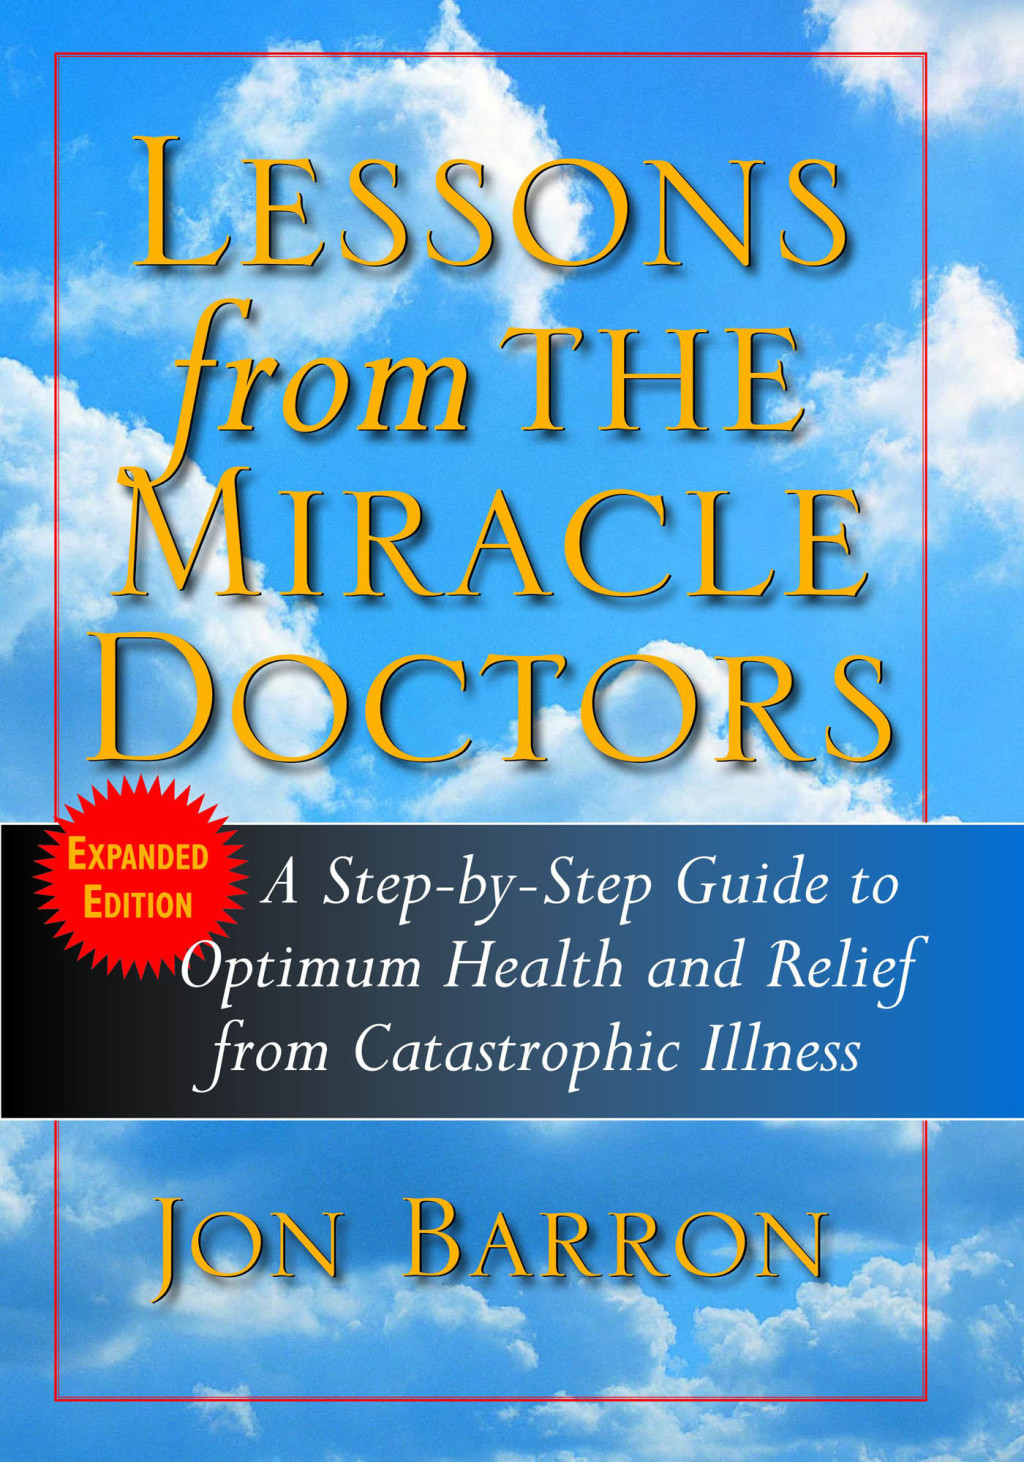 Lessons from the Miracle Doctors (eBook) - Jon Barron,